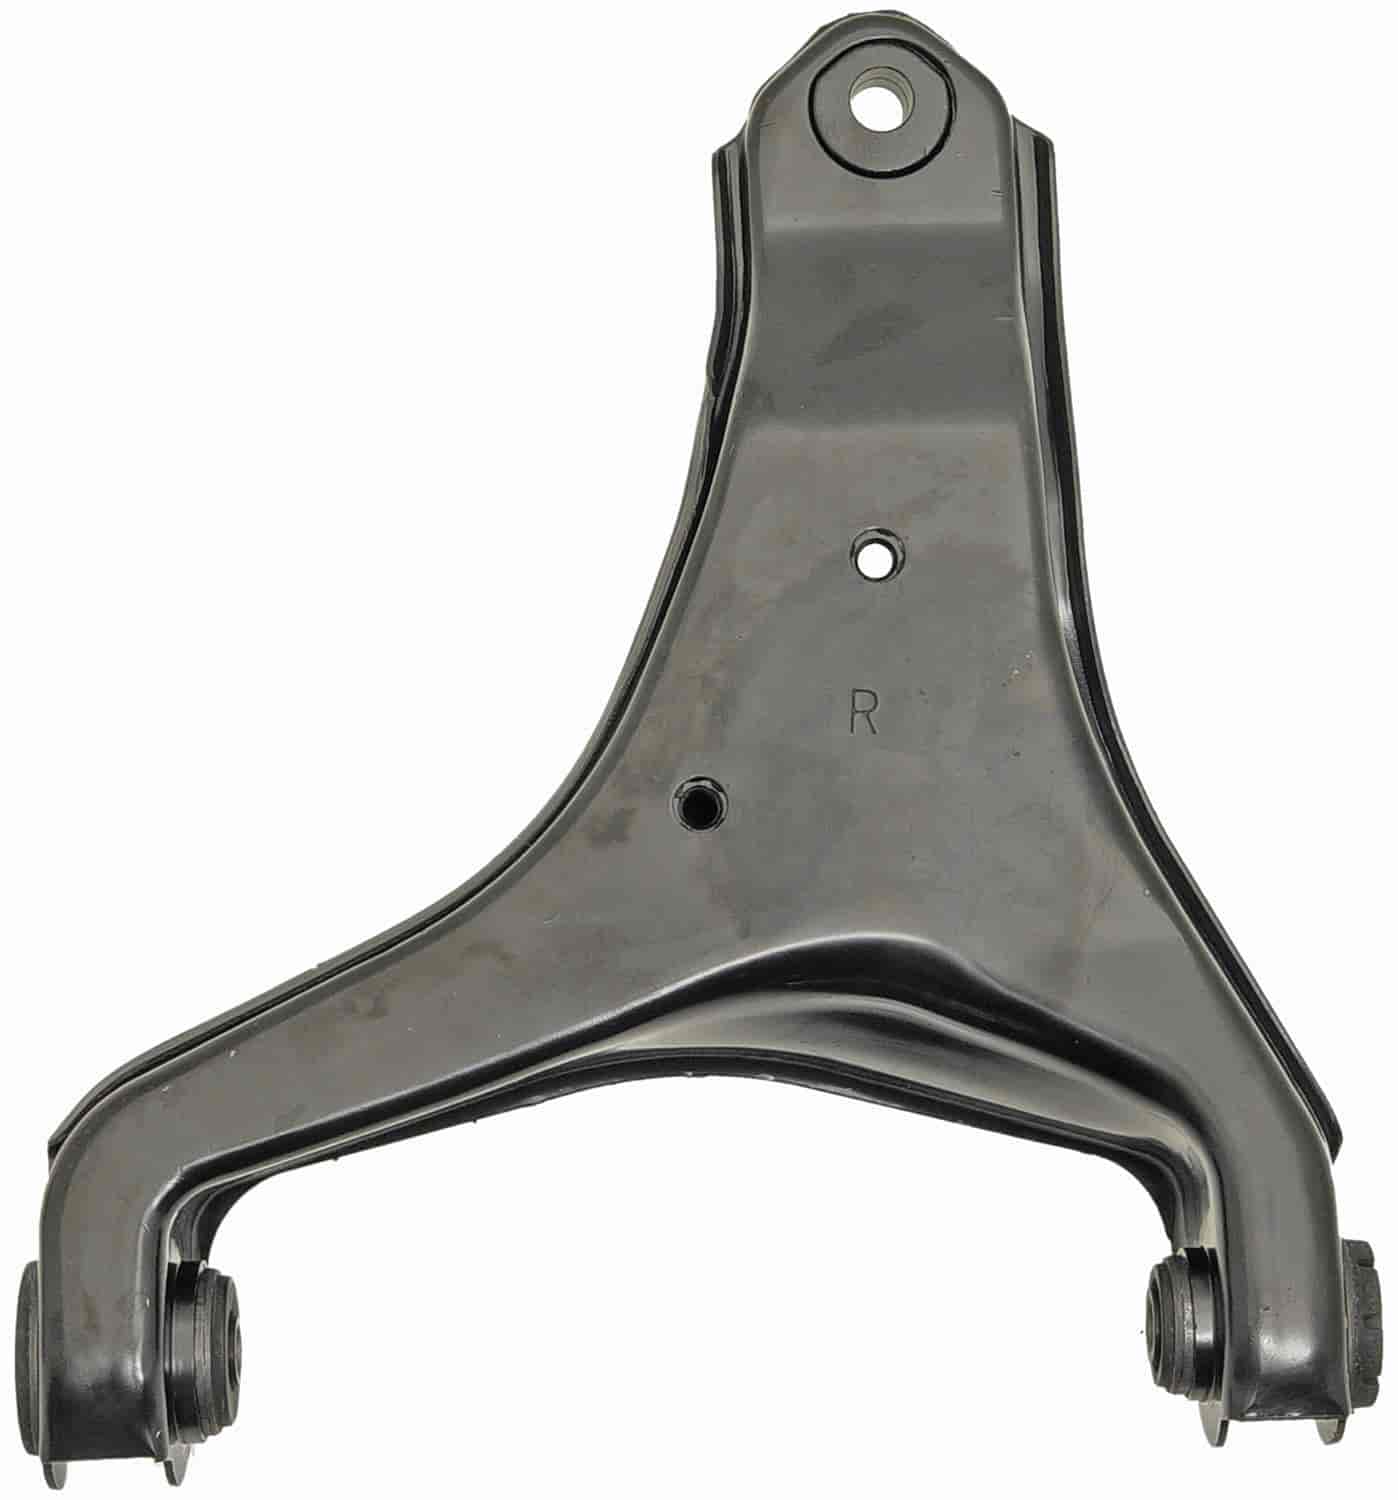 Lower Control Arm 1989-1996 Pontiac/Buick, 1989-1997 Oldsmobile, 1990-2001 Chevy - Front Right